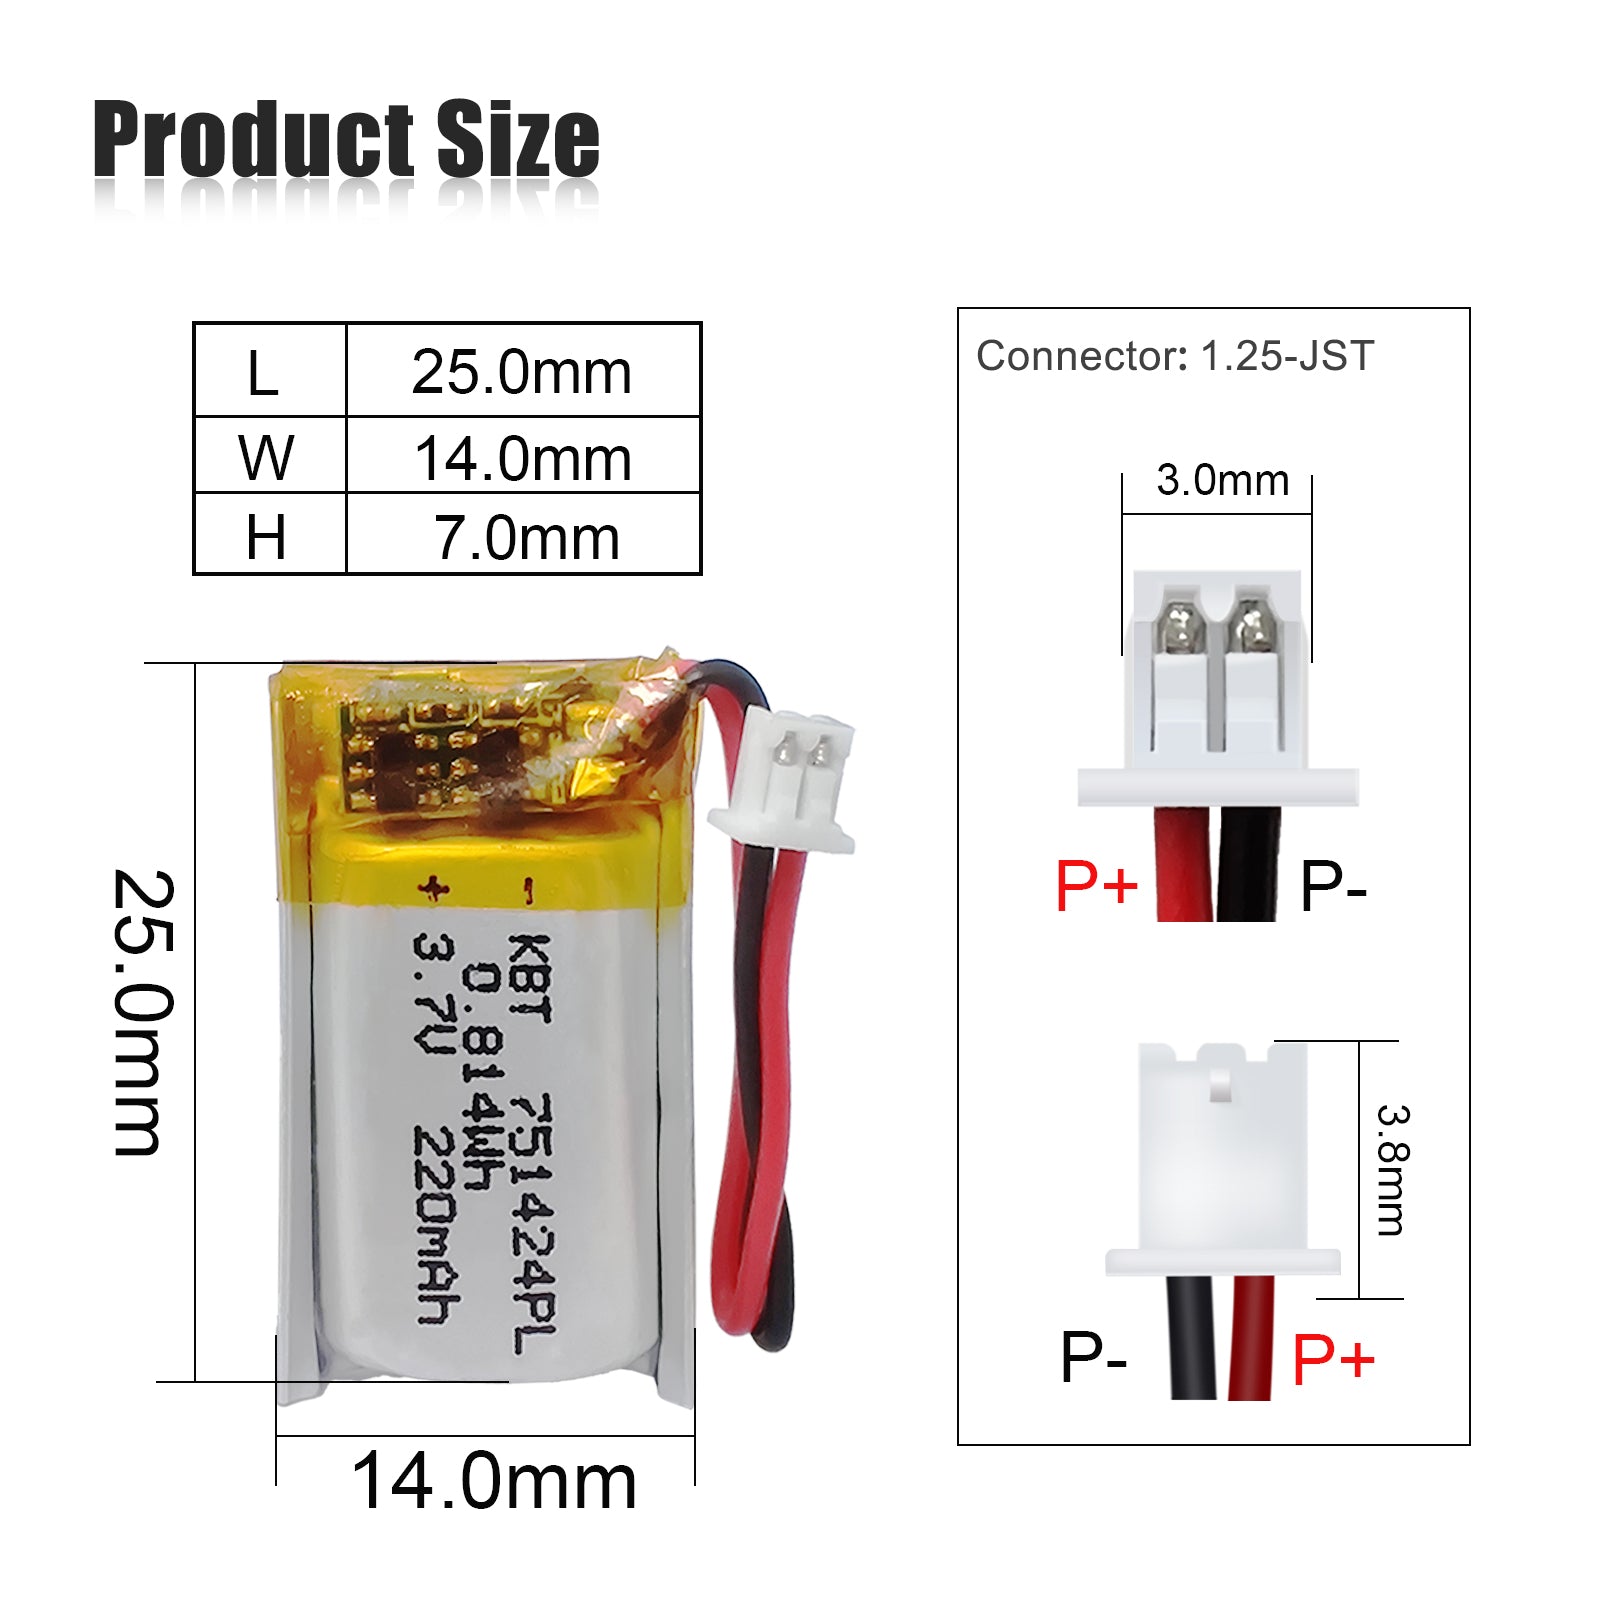 KBT 751424PL 3.7V 220mAh Li-Polymer Rechargeable Battery with 2Pin 1.25 JST  Connector - 2Pack